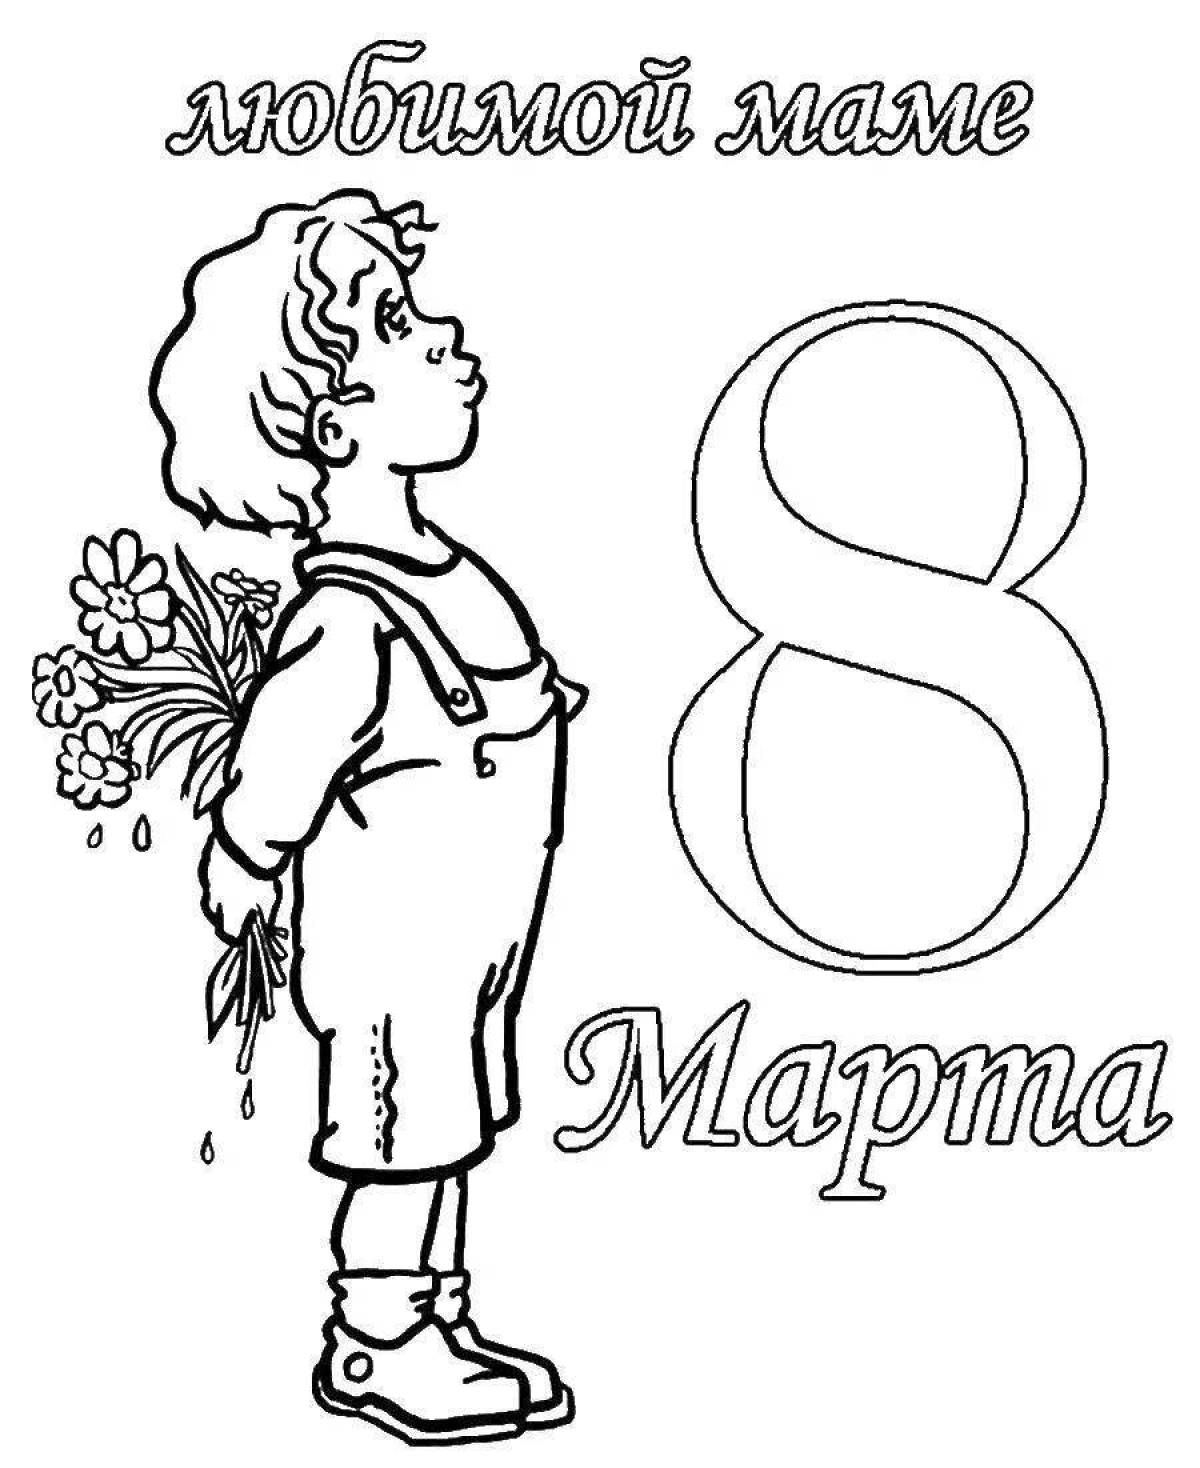 Joyful mom March 8 coloring pages